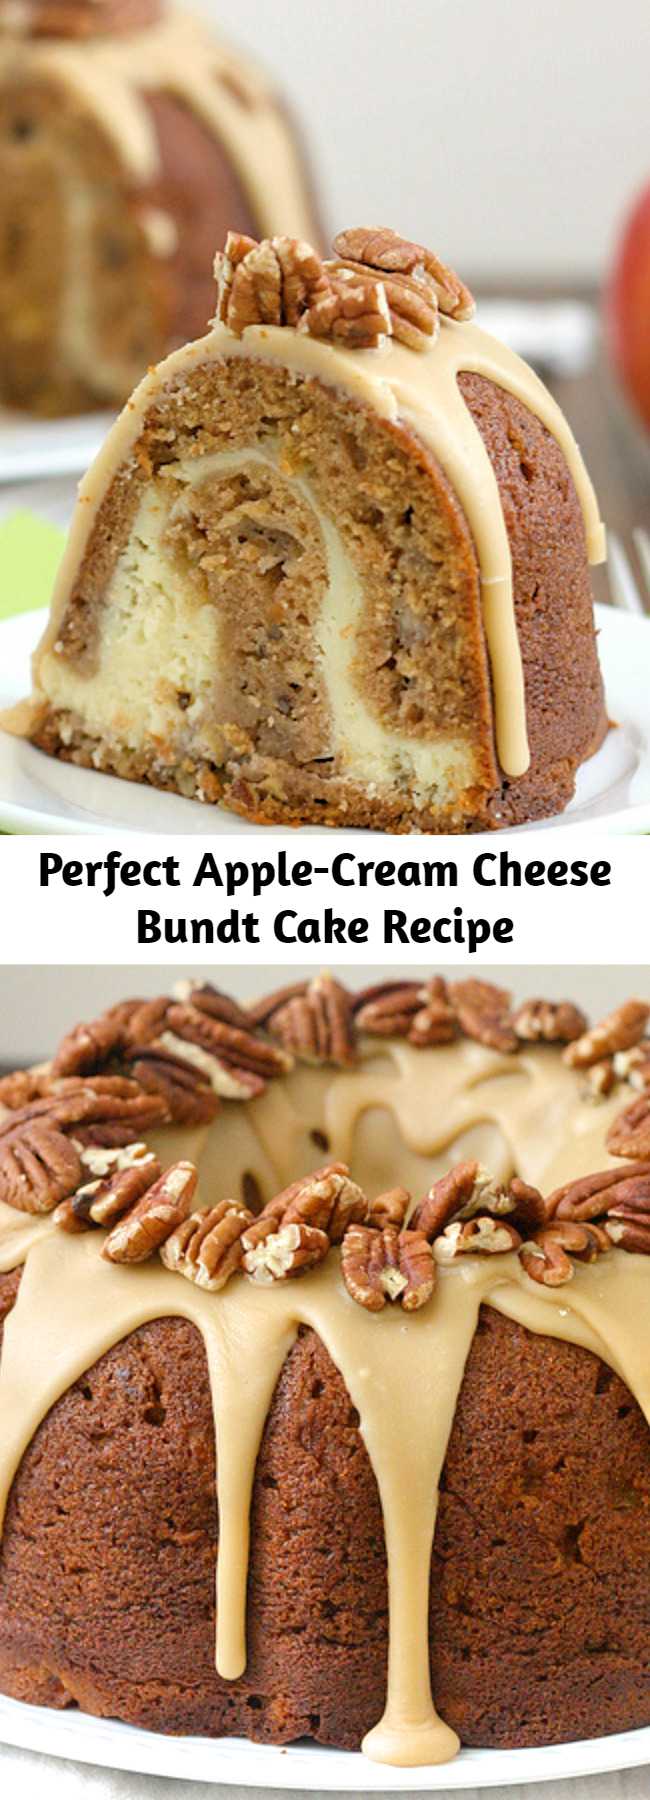 Perfect Apple-Cream Cheese Bundt Cake Recipe - This bundt was the perfect dessert to kick off apple season; I could not get enough! In addition to diced apples interspersed throughout the cake, there's also applesauce in the batter for double the apple goodness. The thick pocket of cream cheese in the center is to die for, but my favorite was the sweet praline frosting on top of the cake. Dig in for dessert, or enjoy a slice for breakfast - you can't go wrong either way.